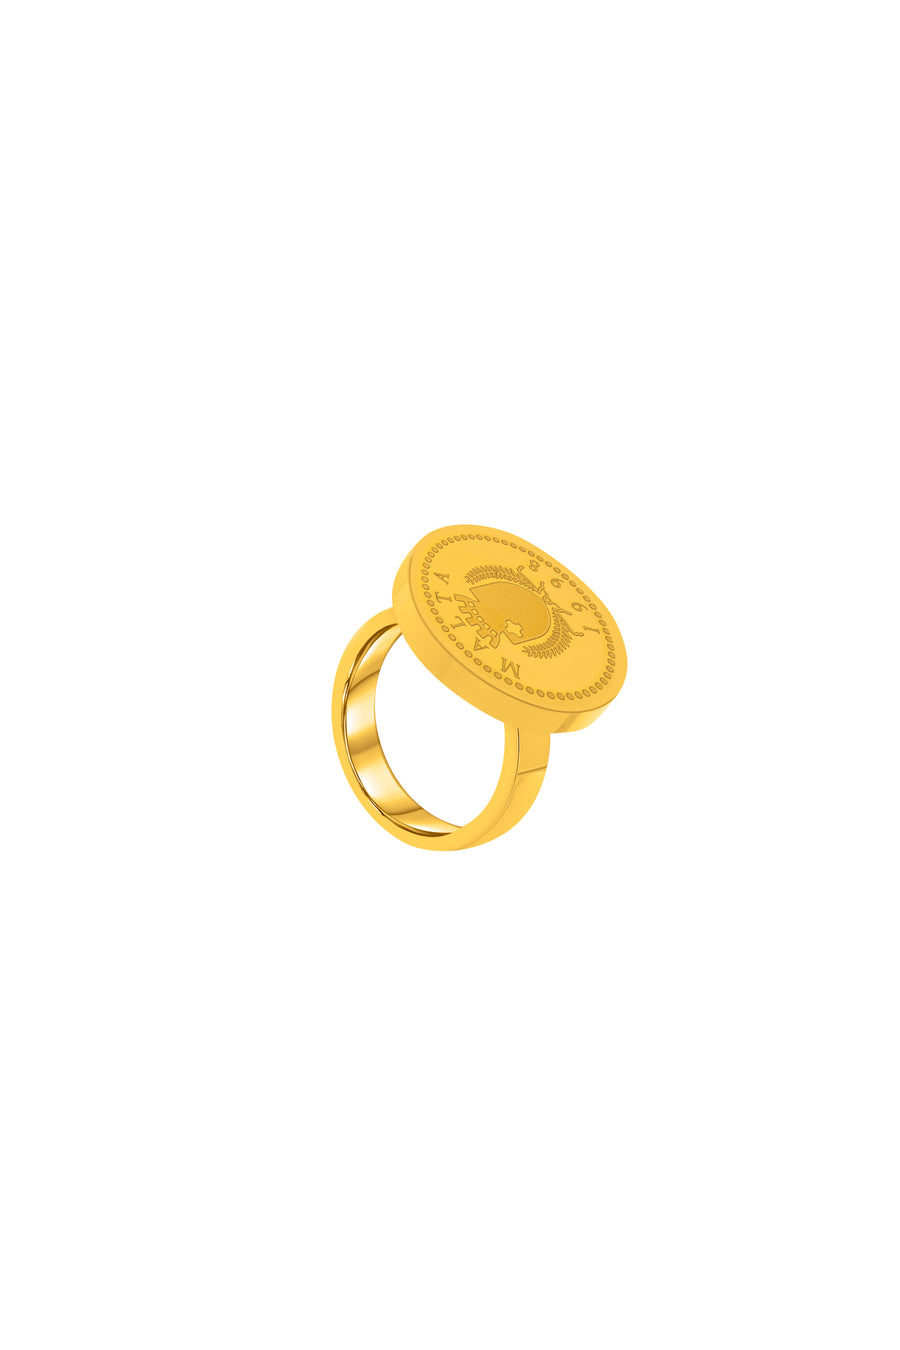 Coat Of Arms Ring